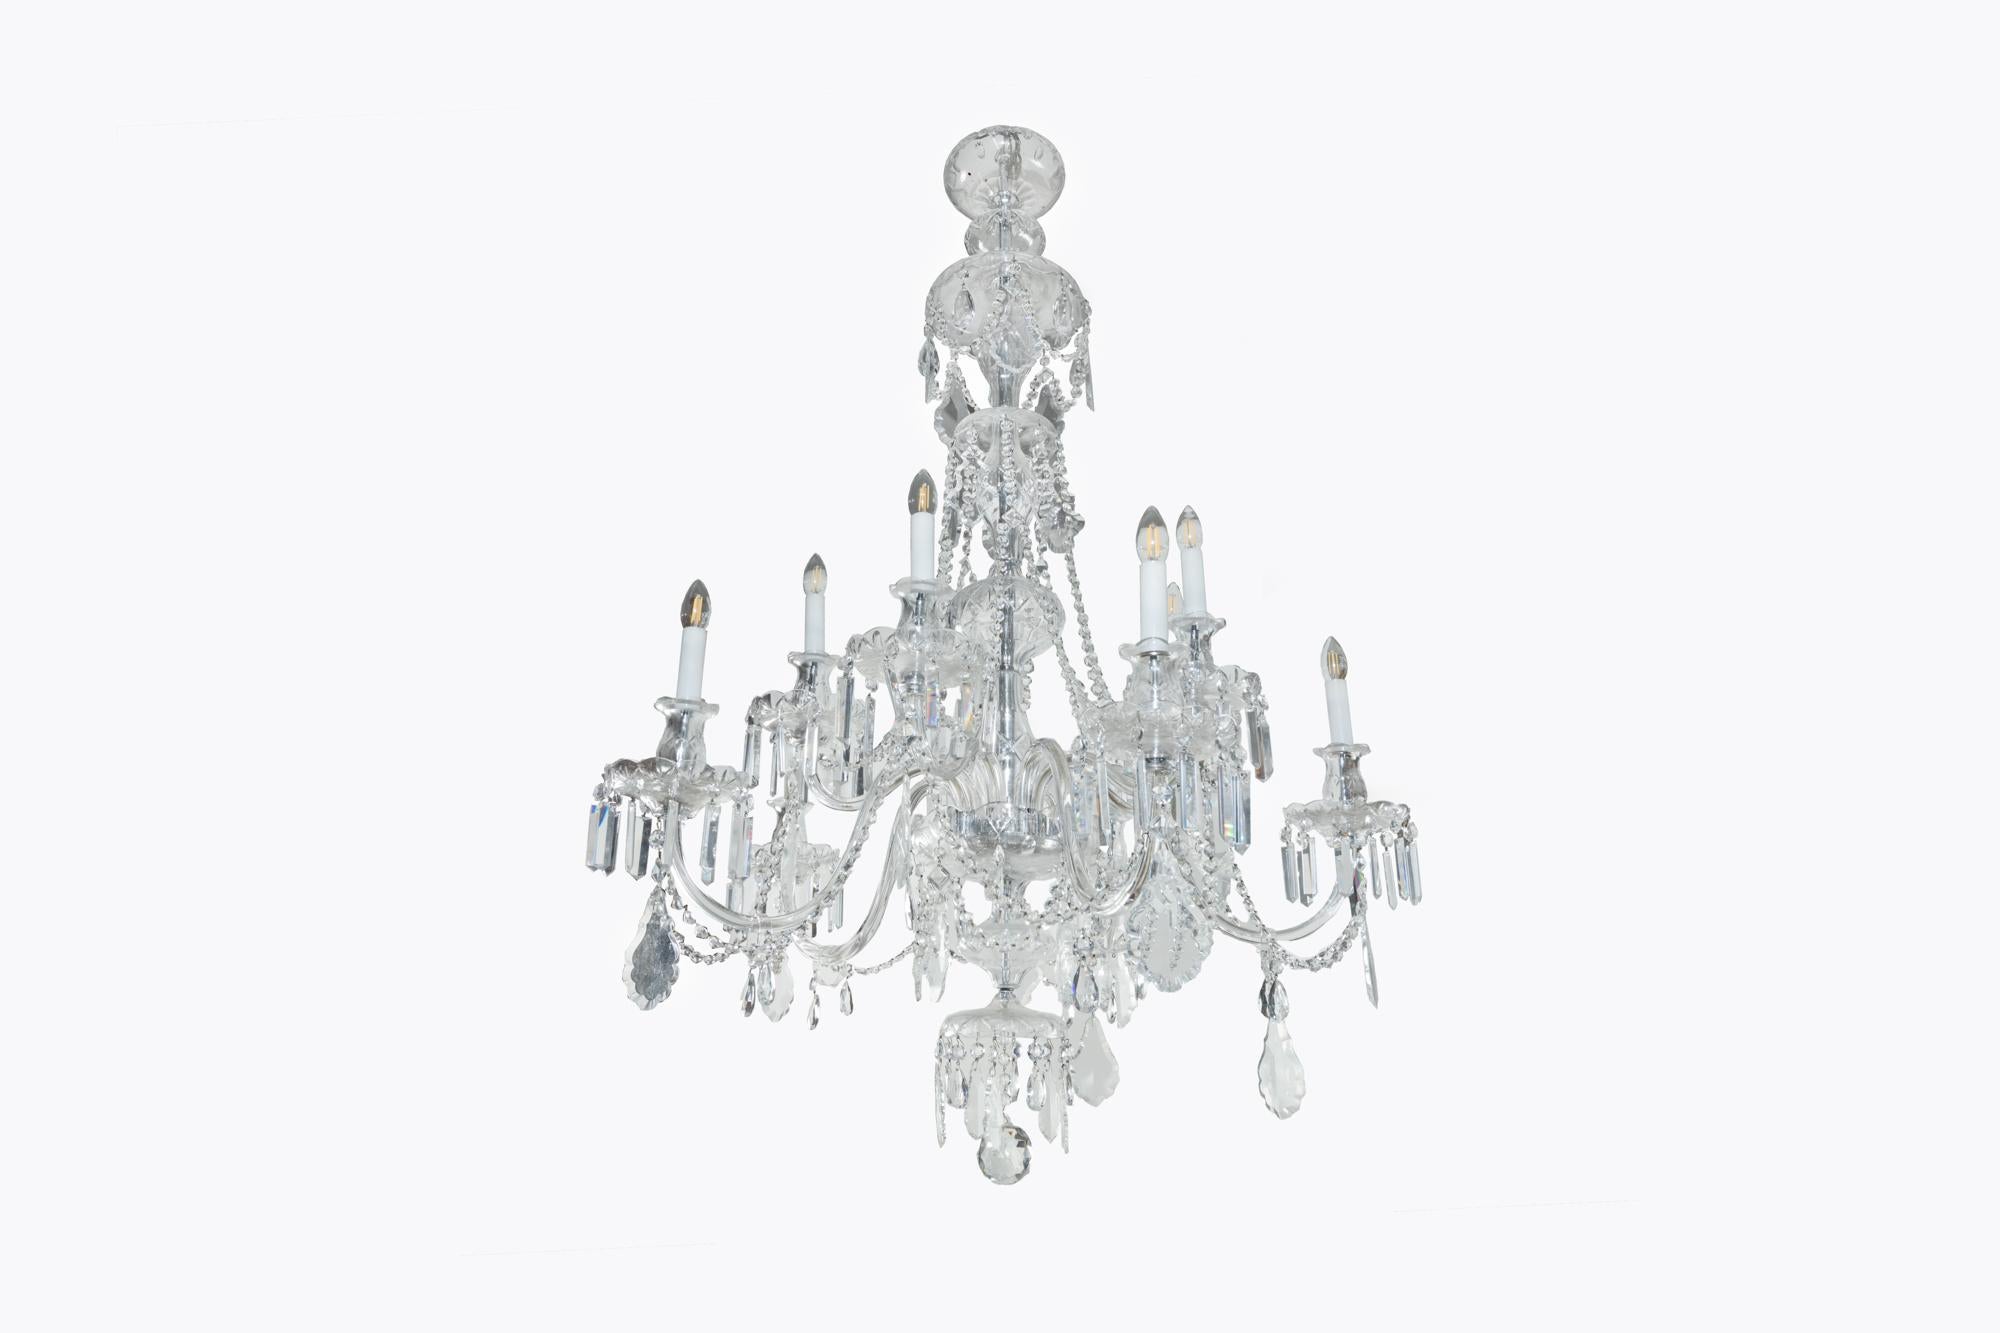 Early 20th Century English Glass Chandelier In Excellent Condition For Sale In Dublin 8, IE